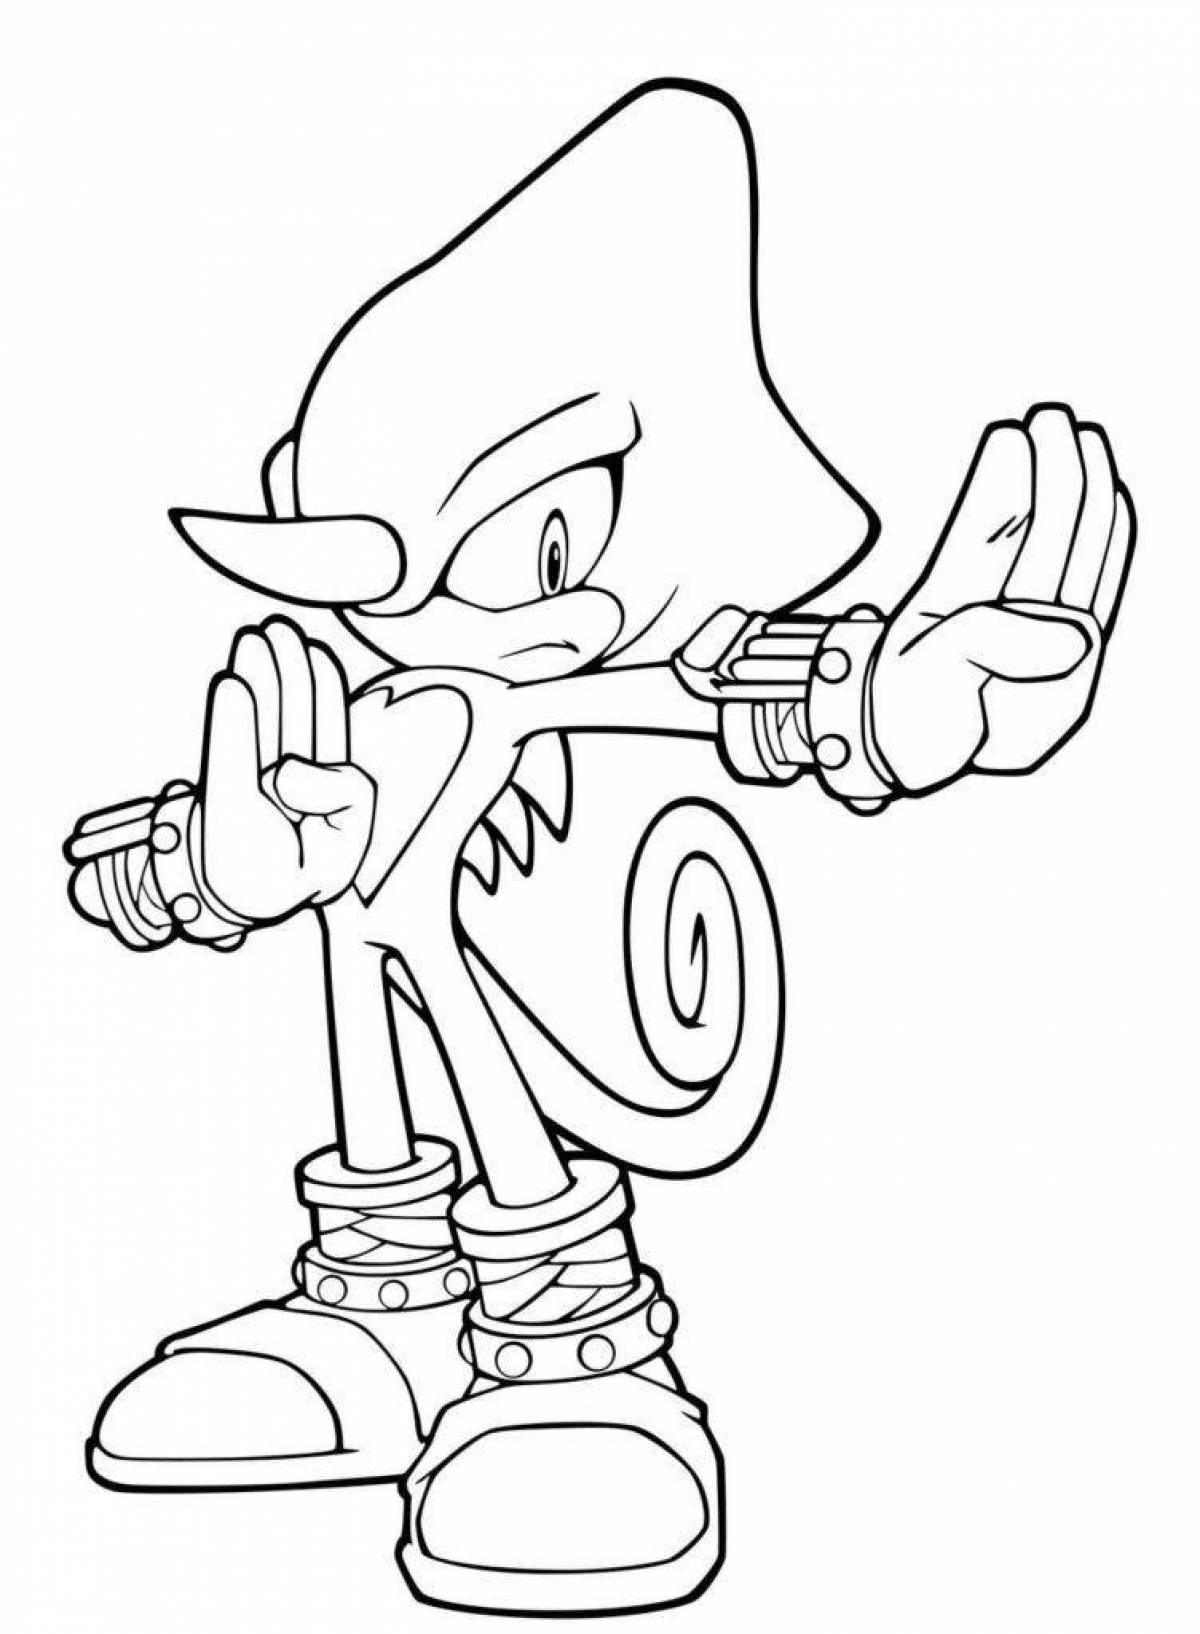 Intriguing sonic x coloring book